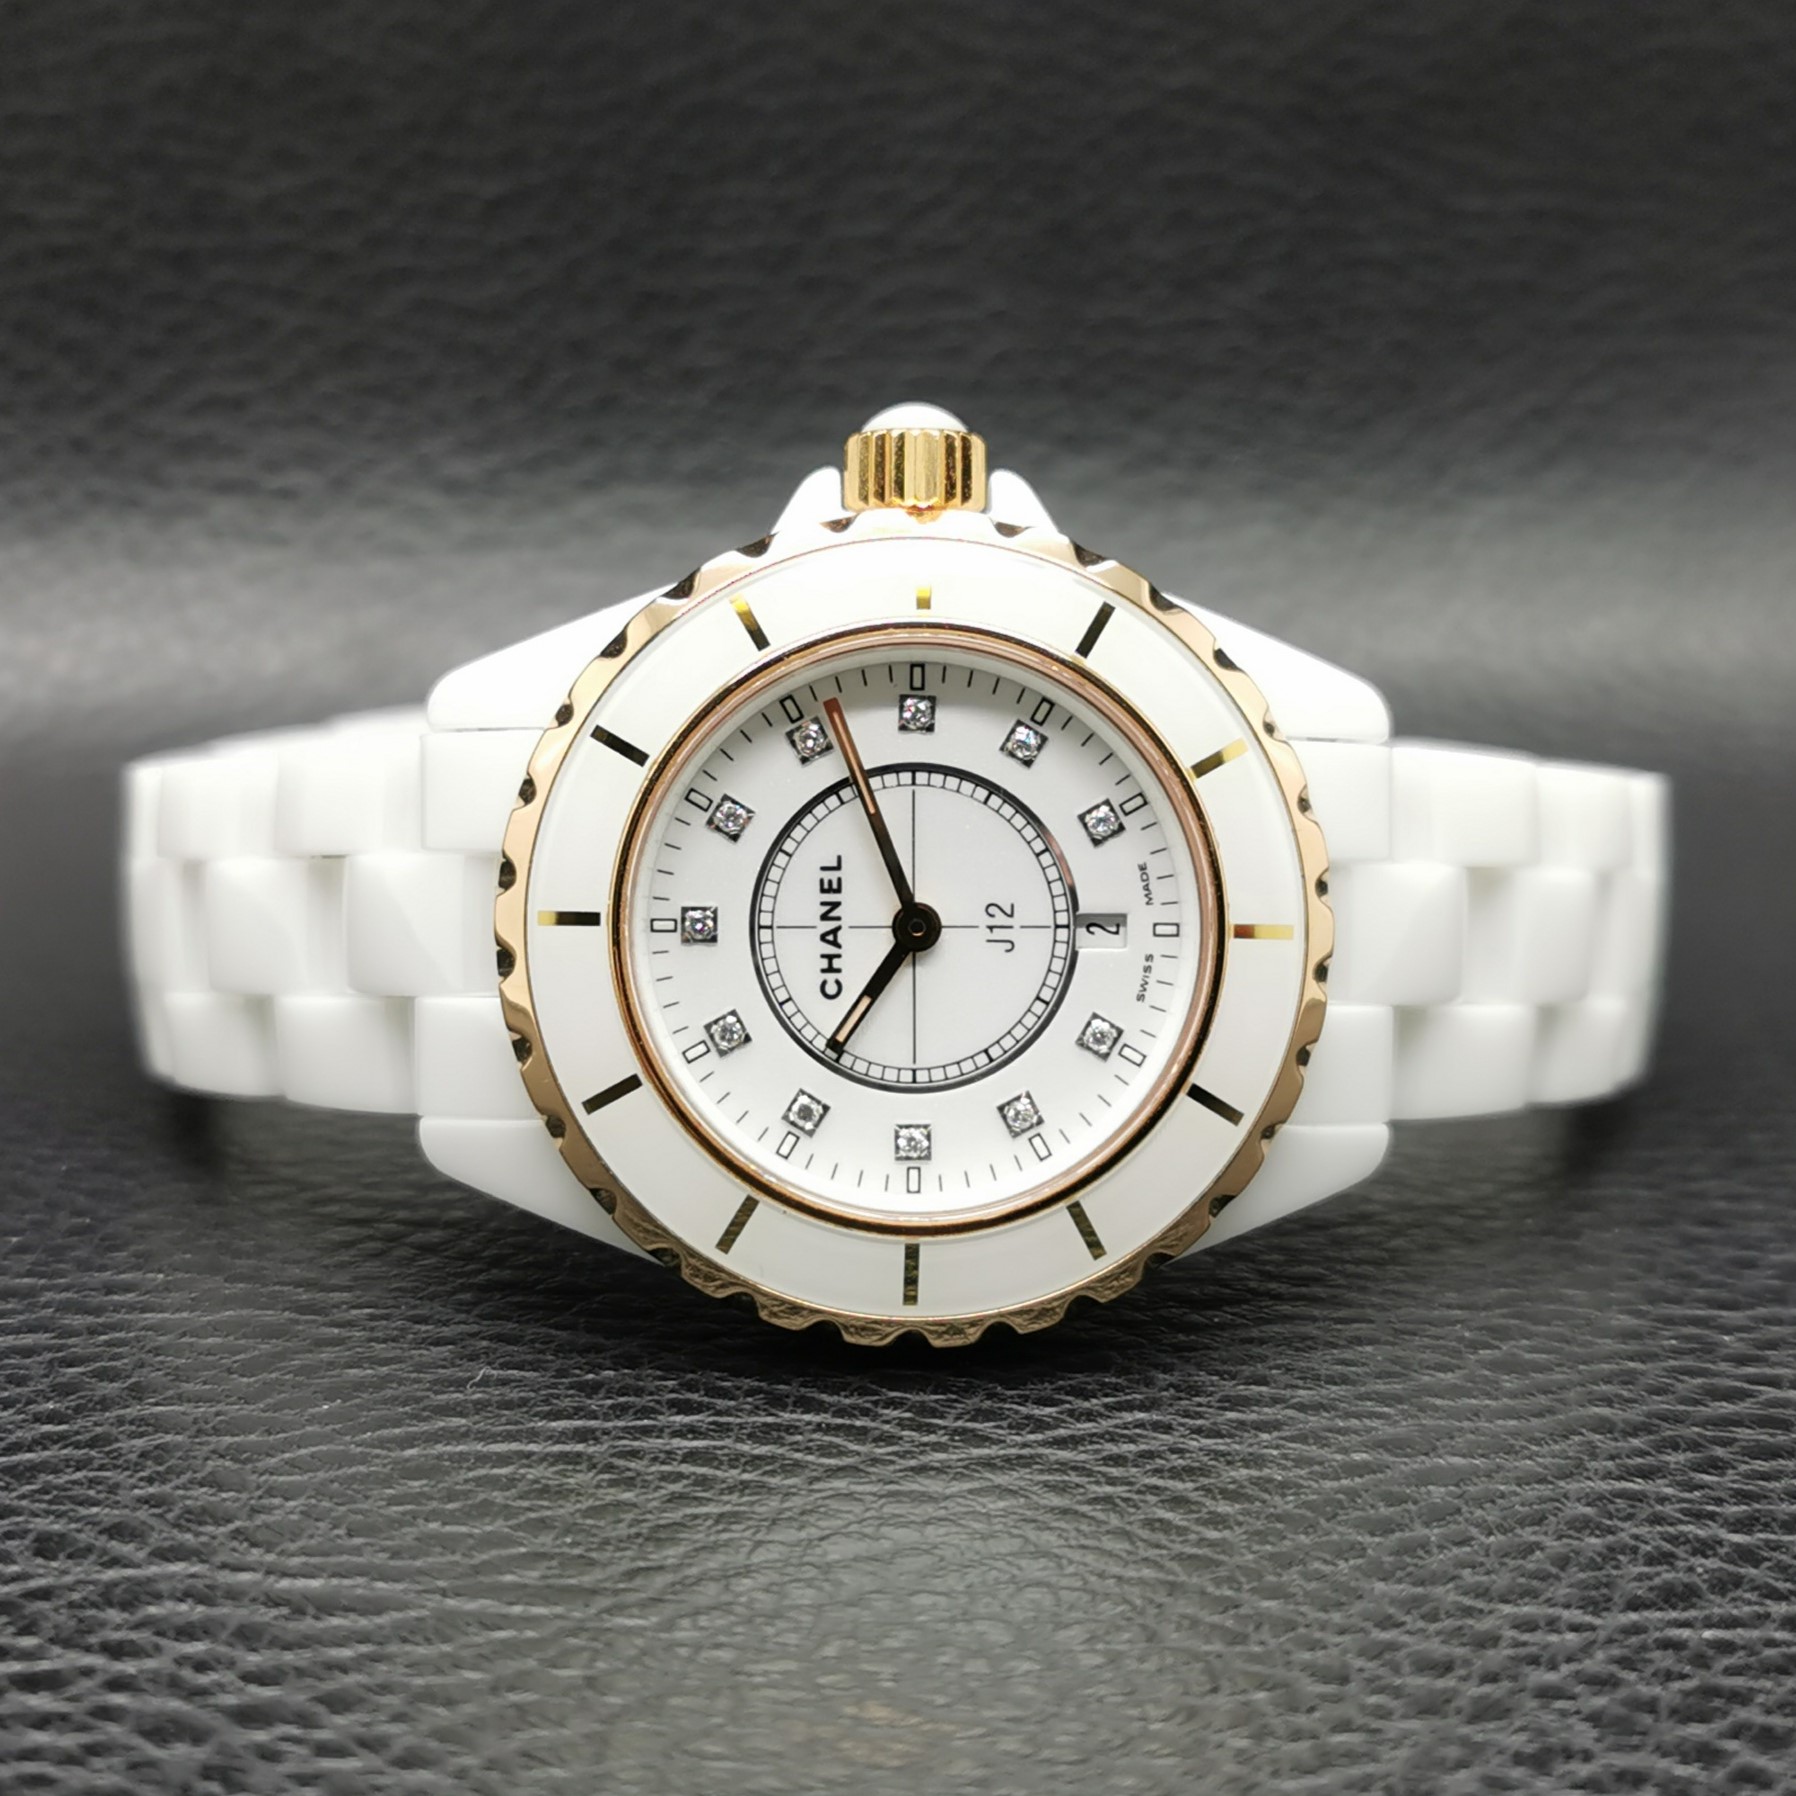 CENTER WATCH: SOLD: CHANEL J12 33mm HALF ROSE GOLD LADY SIZE PREOWNED